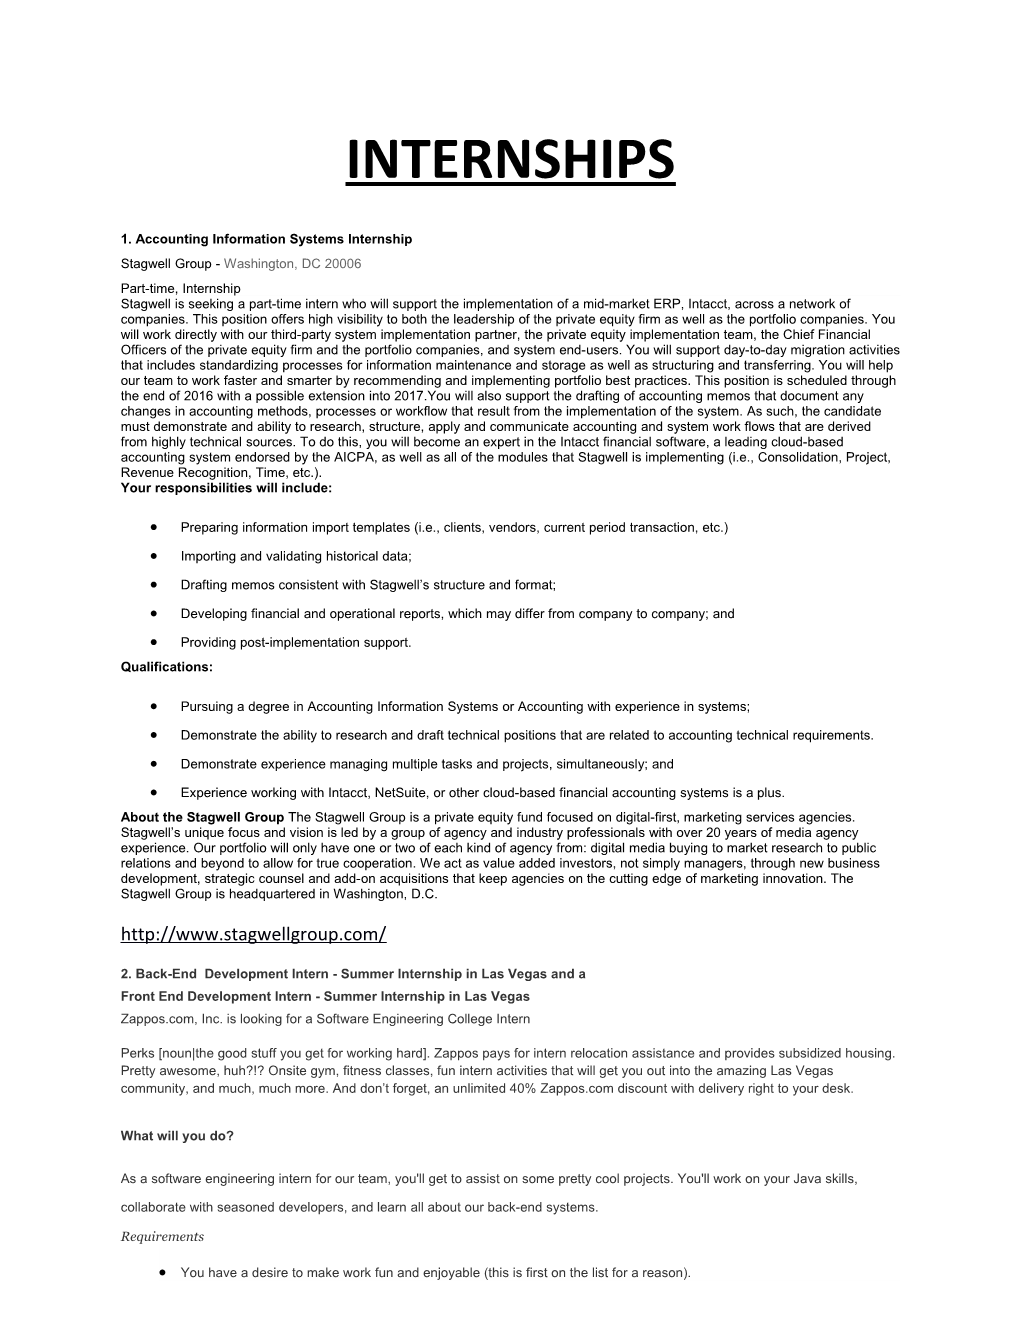 1. Accounting Information Systems Internship Stagwell Group-Washington, DC 20006